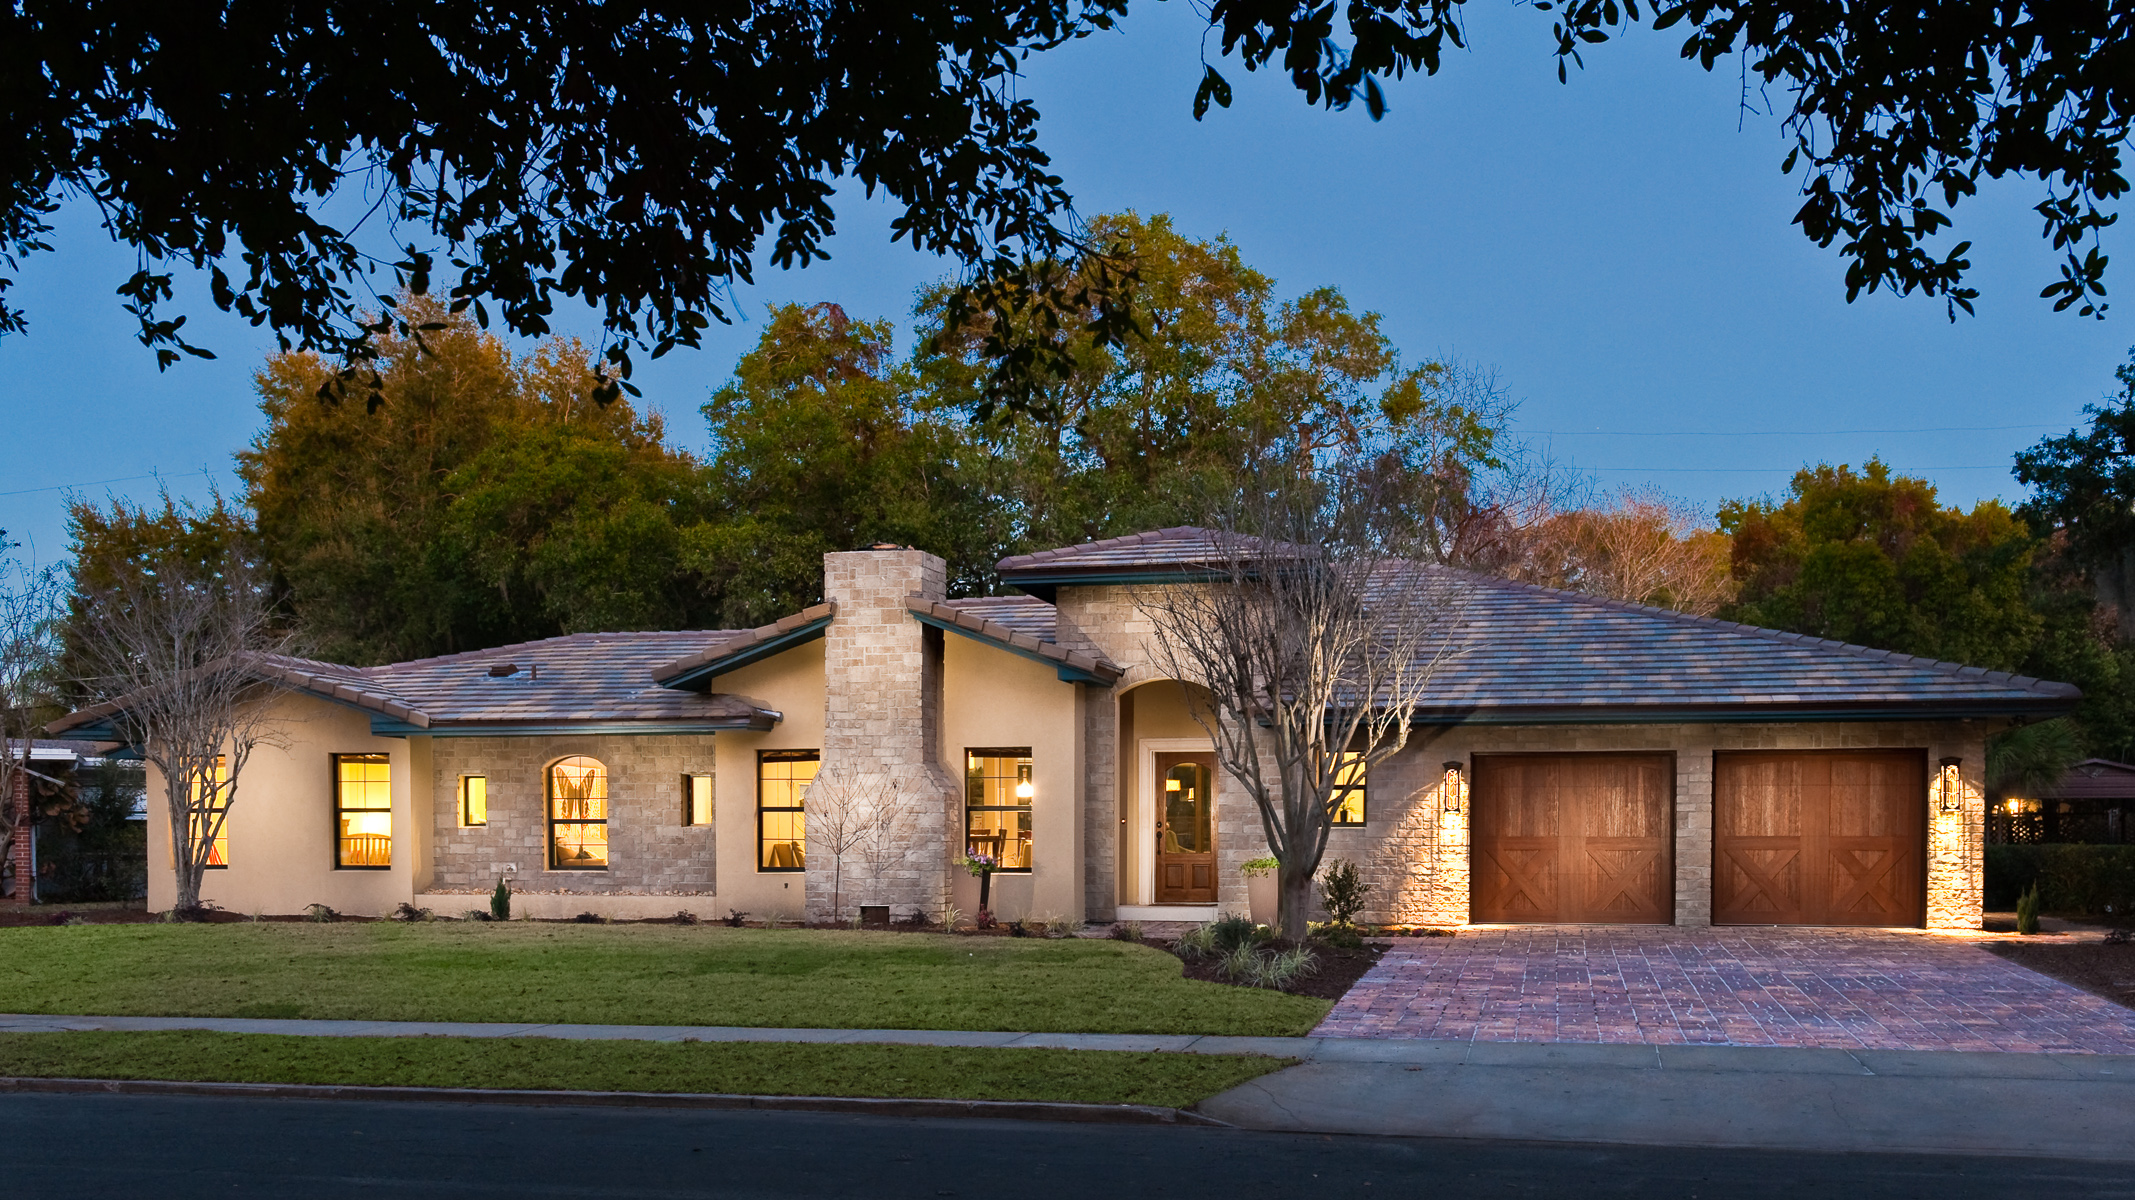 a home with a driveway and garage at dusk.